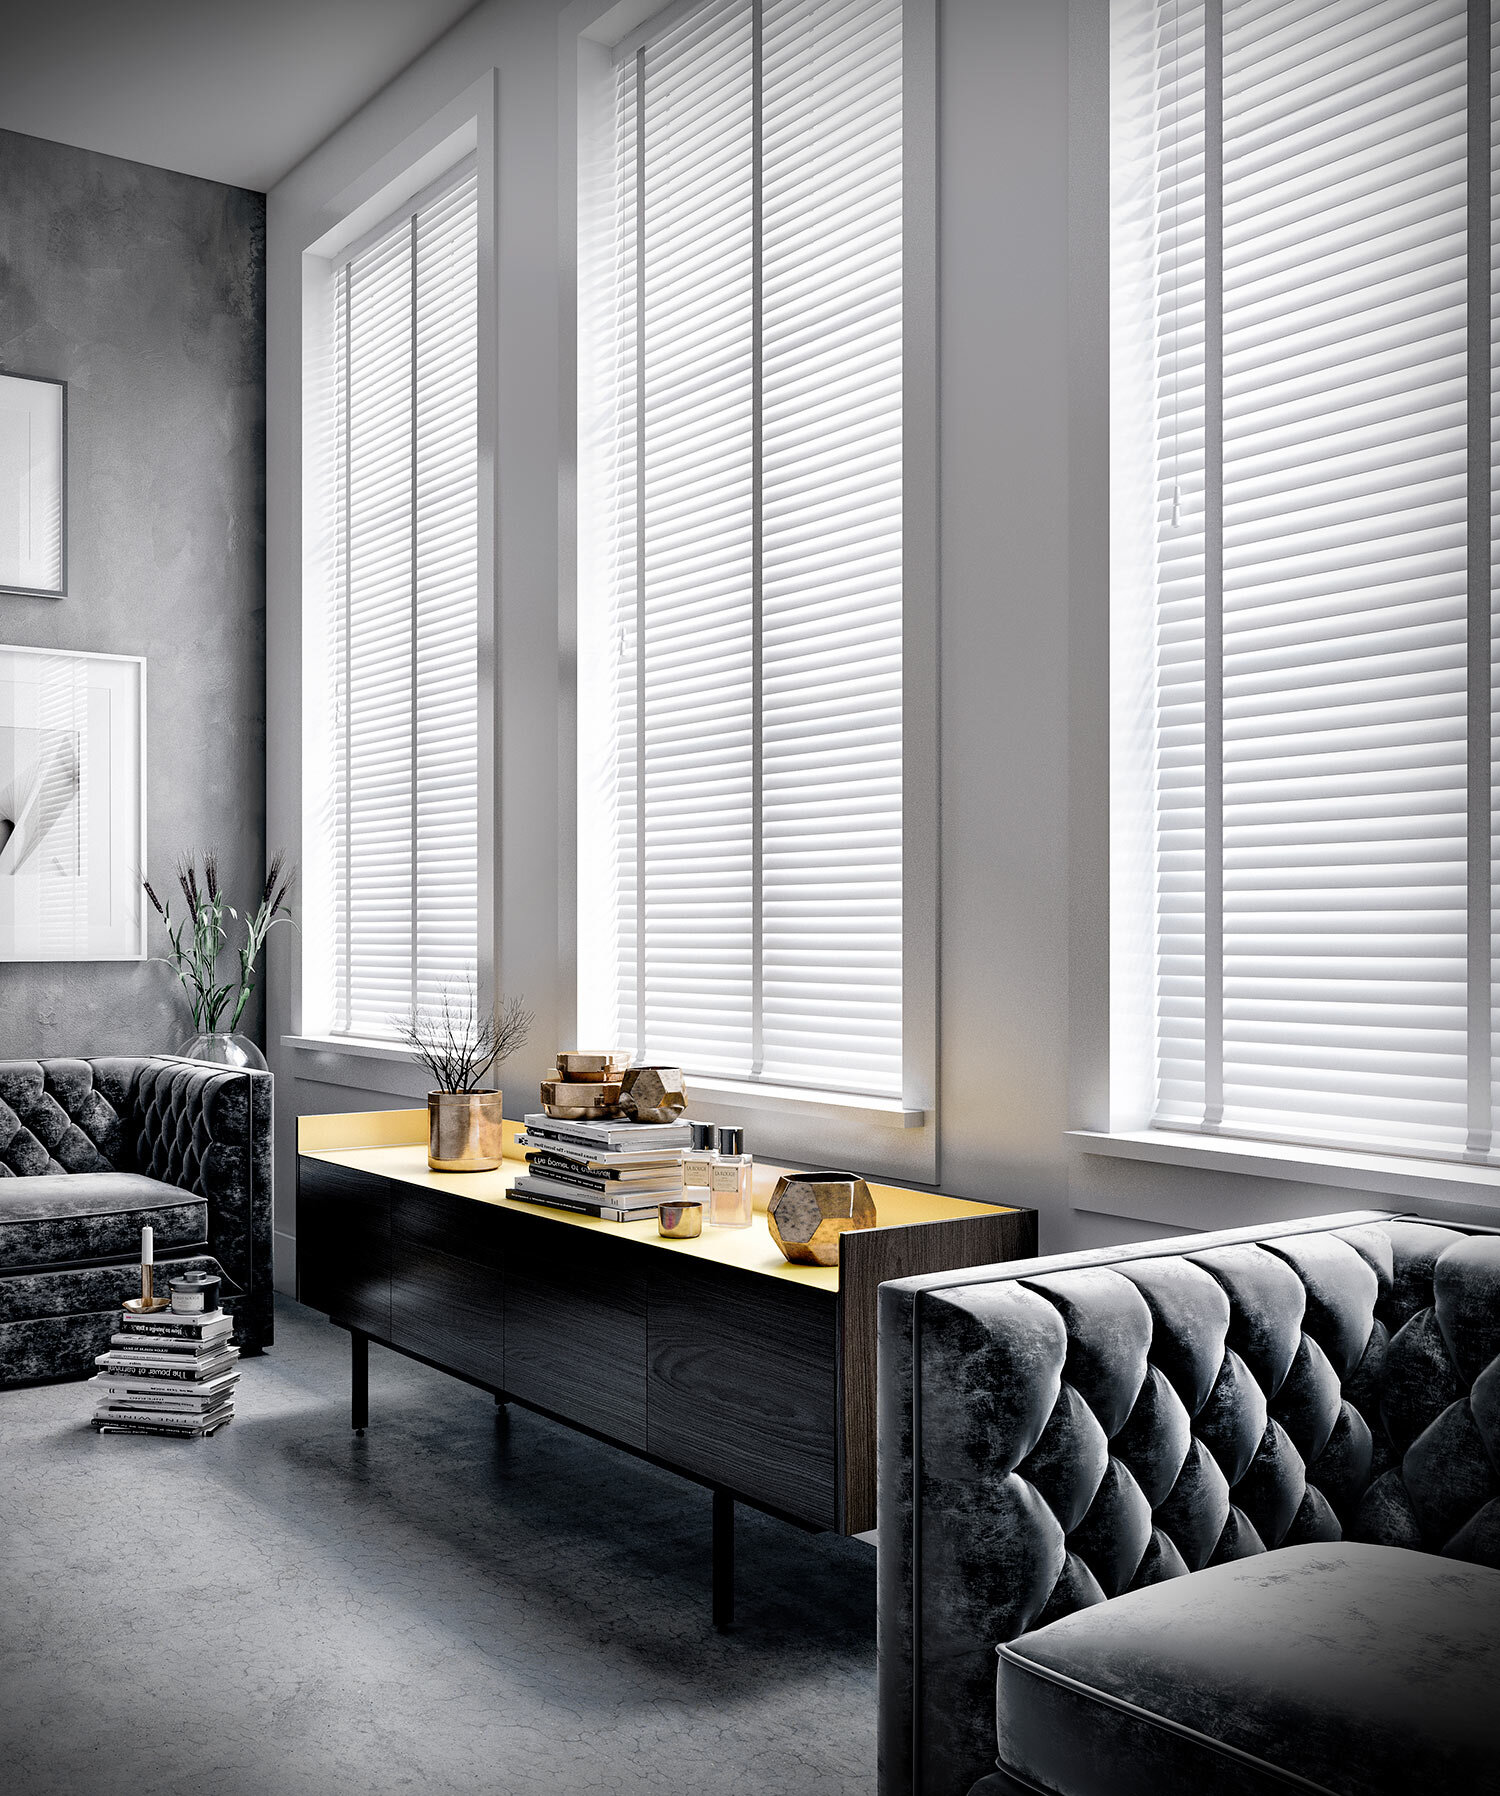 Motorised Window Blinds Hampshire. We provide great solutions electric blinds in Hampshire. These can be hard-wired or a retro-fit battery operated solution using rechargeable lithium ion batteries. 